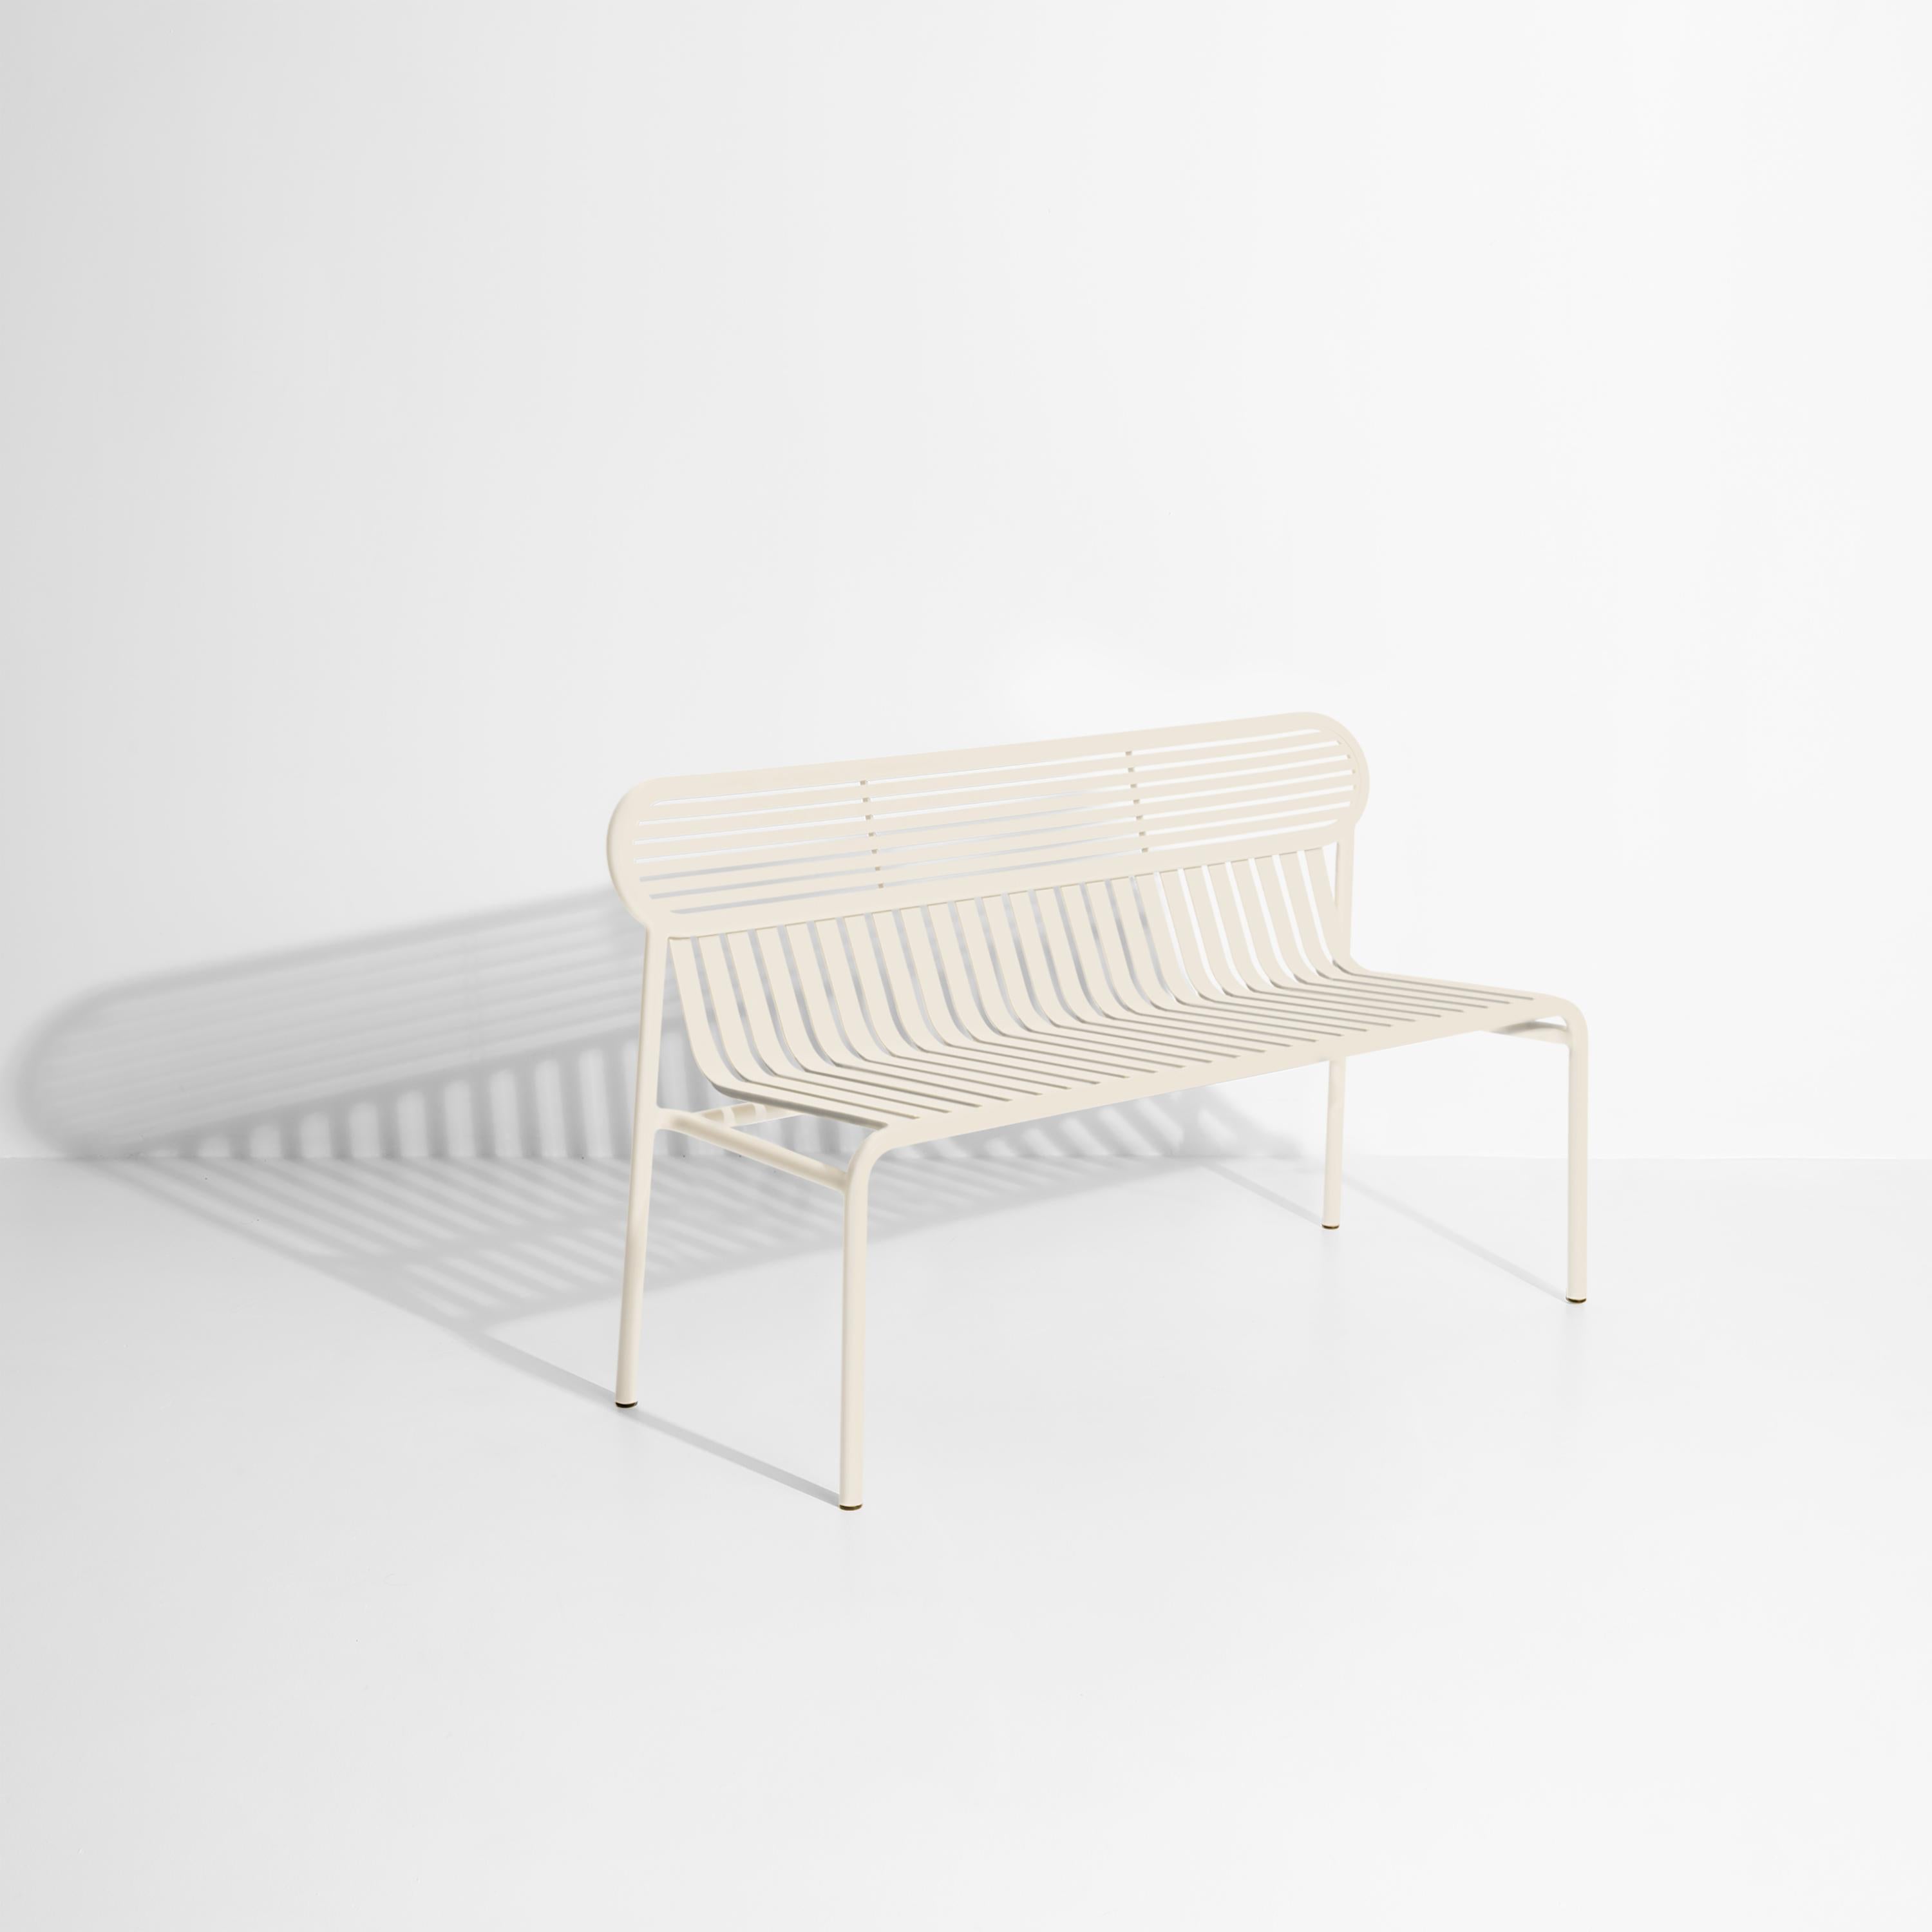 Petite Friture Week-End Bench in Ivory Aluminium by Studio BrichetZiegler, 2017

The week-end collection is a full range of outdoor furniture, in aluminium grained epoxy paint, matt finish, that includes 18 functions and 8 colours for the retail